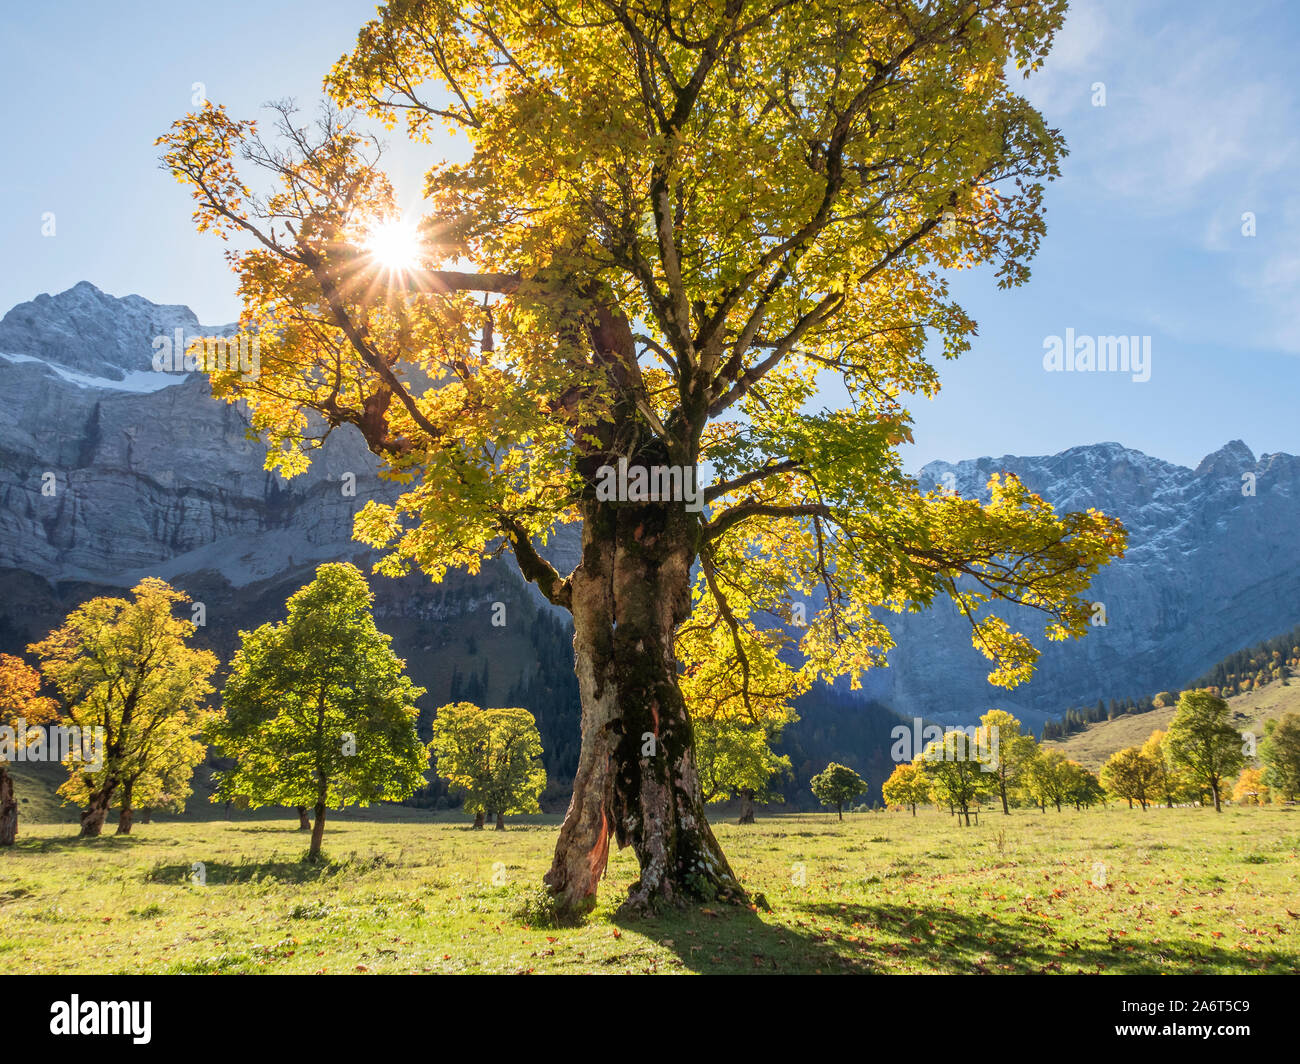 Gnarled, hundreds of years old ree with an autumn color change through the sunlight, from orange to yellow, at the Great Ahornboden, Austria Stock Photo